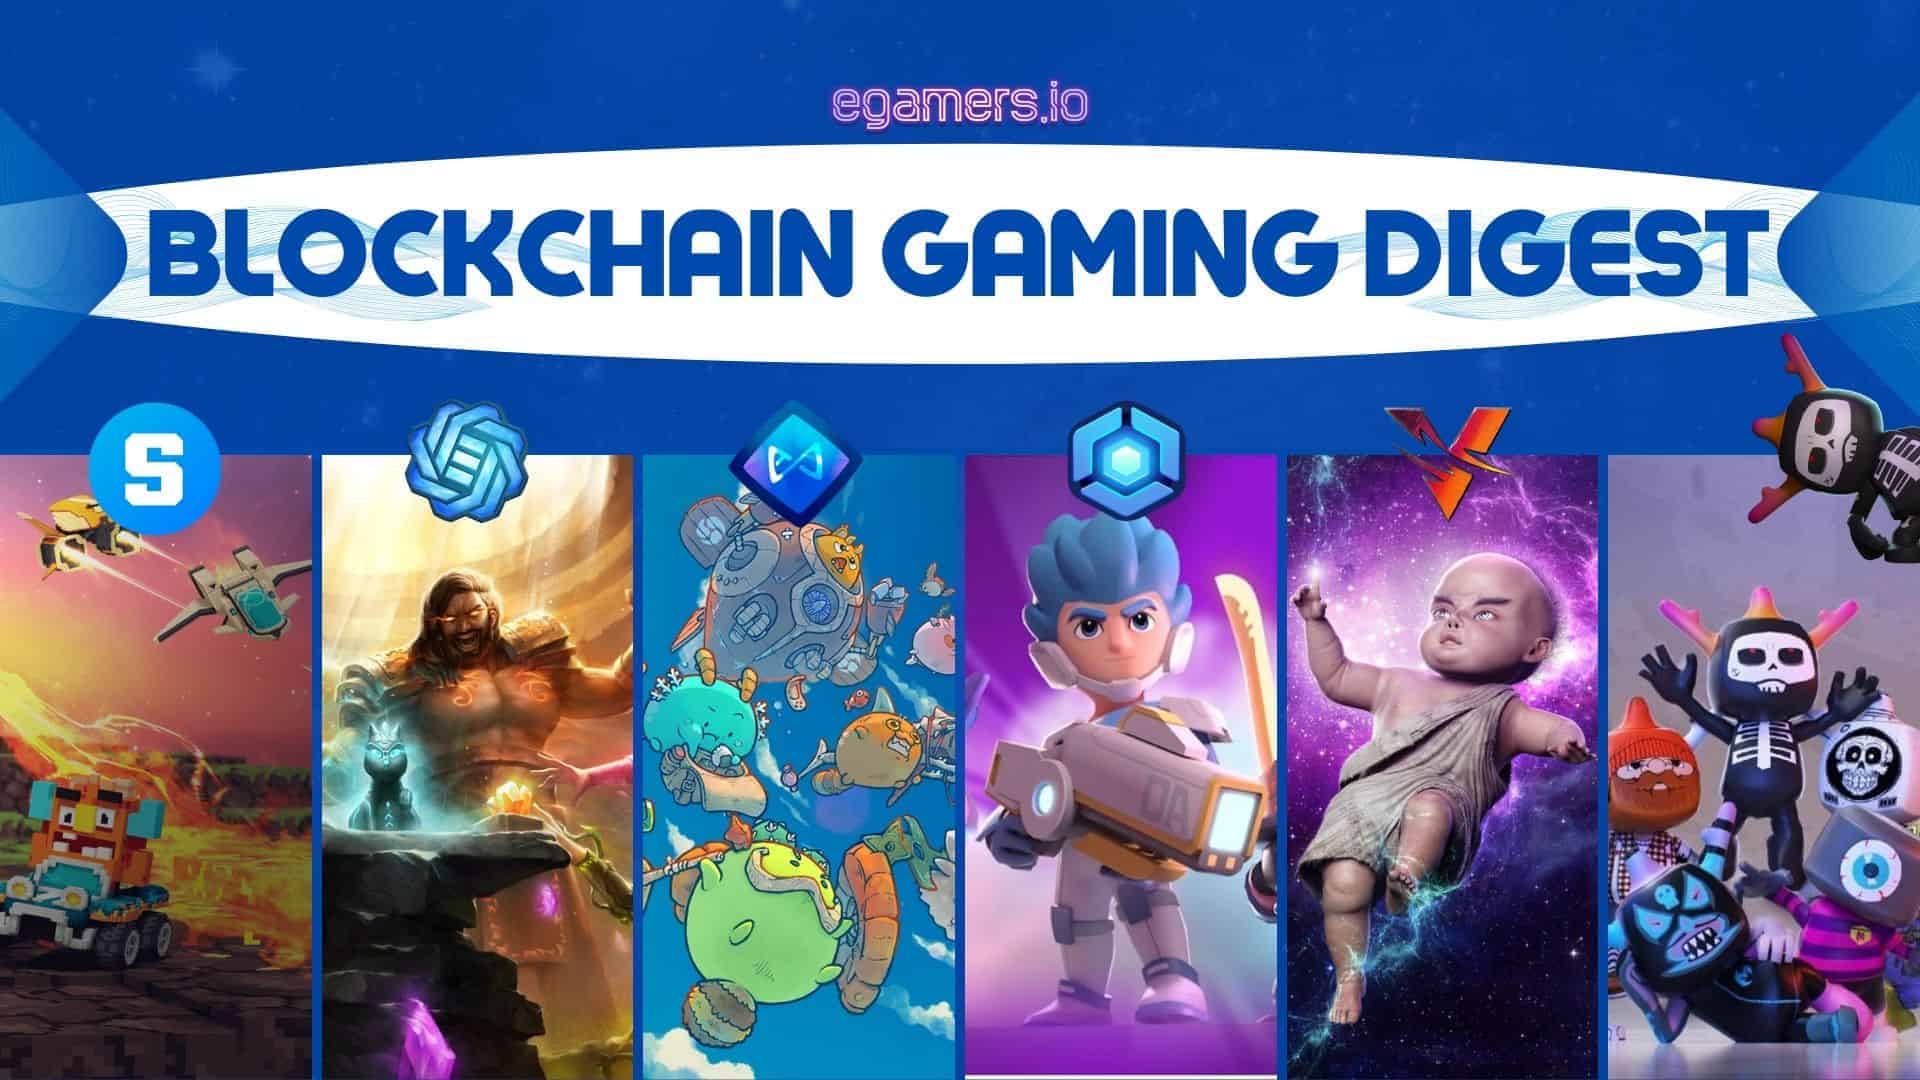 BLOCKCHAIN GAMING DIGEST new What’s up, eGamers, it’s time for the weekly Blockchain Gaming Digest. Every week, we share some of the most important NFT gaming news and other interesting facts.